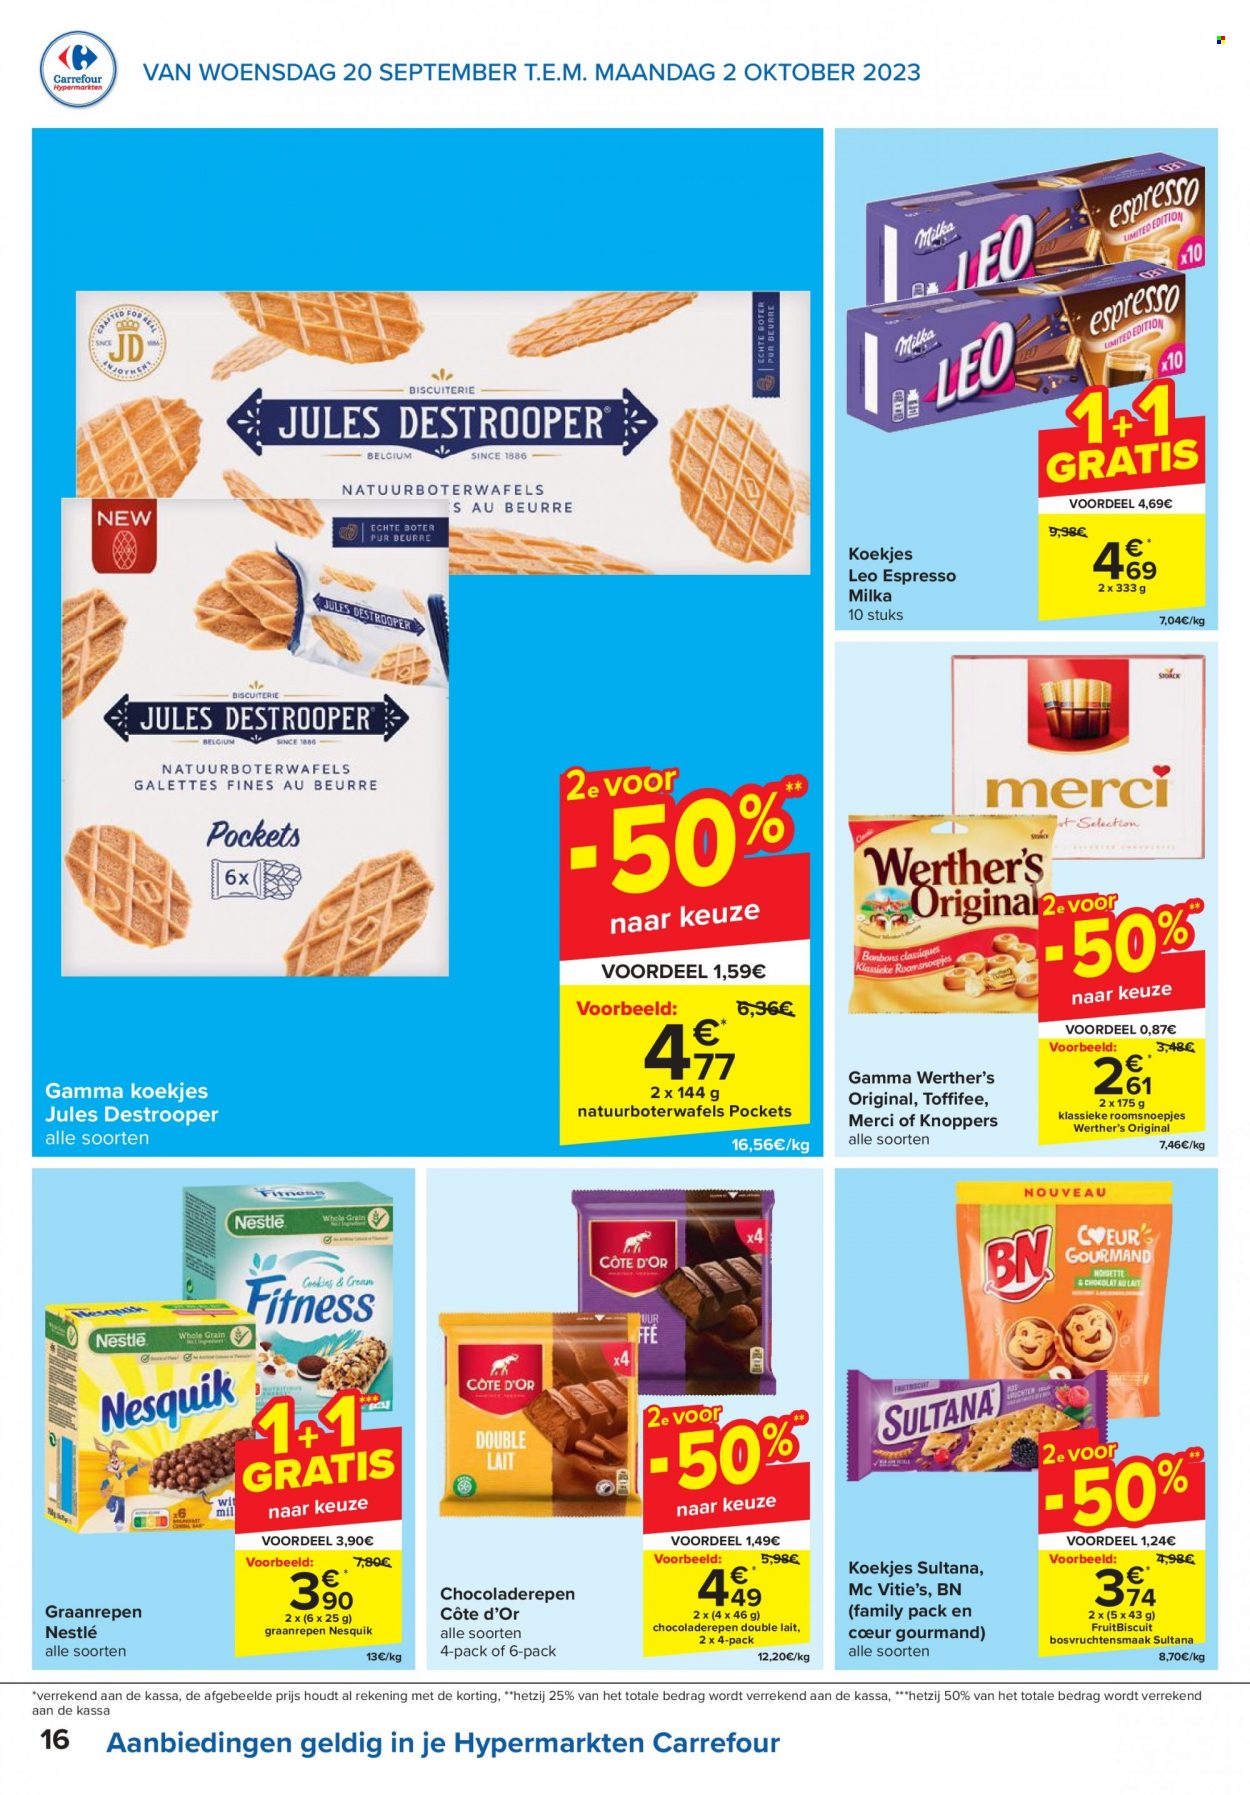 Catalogue Carrefour hypermarkt - 20.9.2023 - 2.10.2023. Page 16.